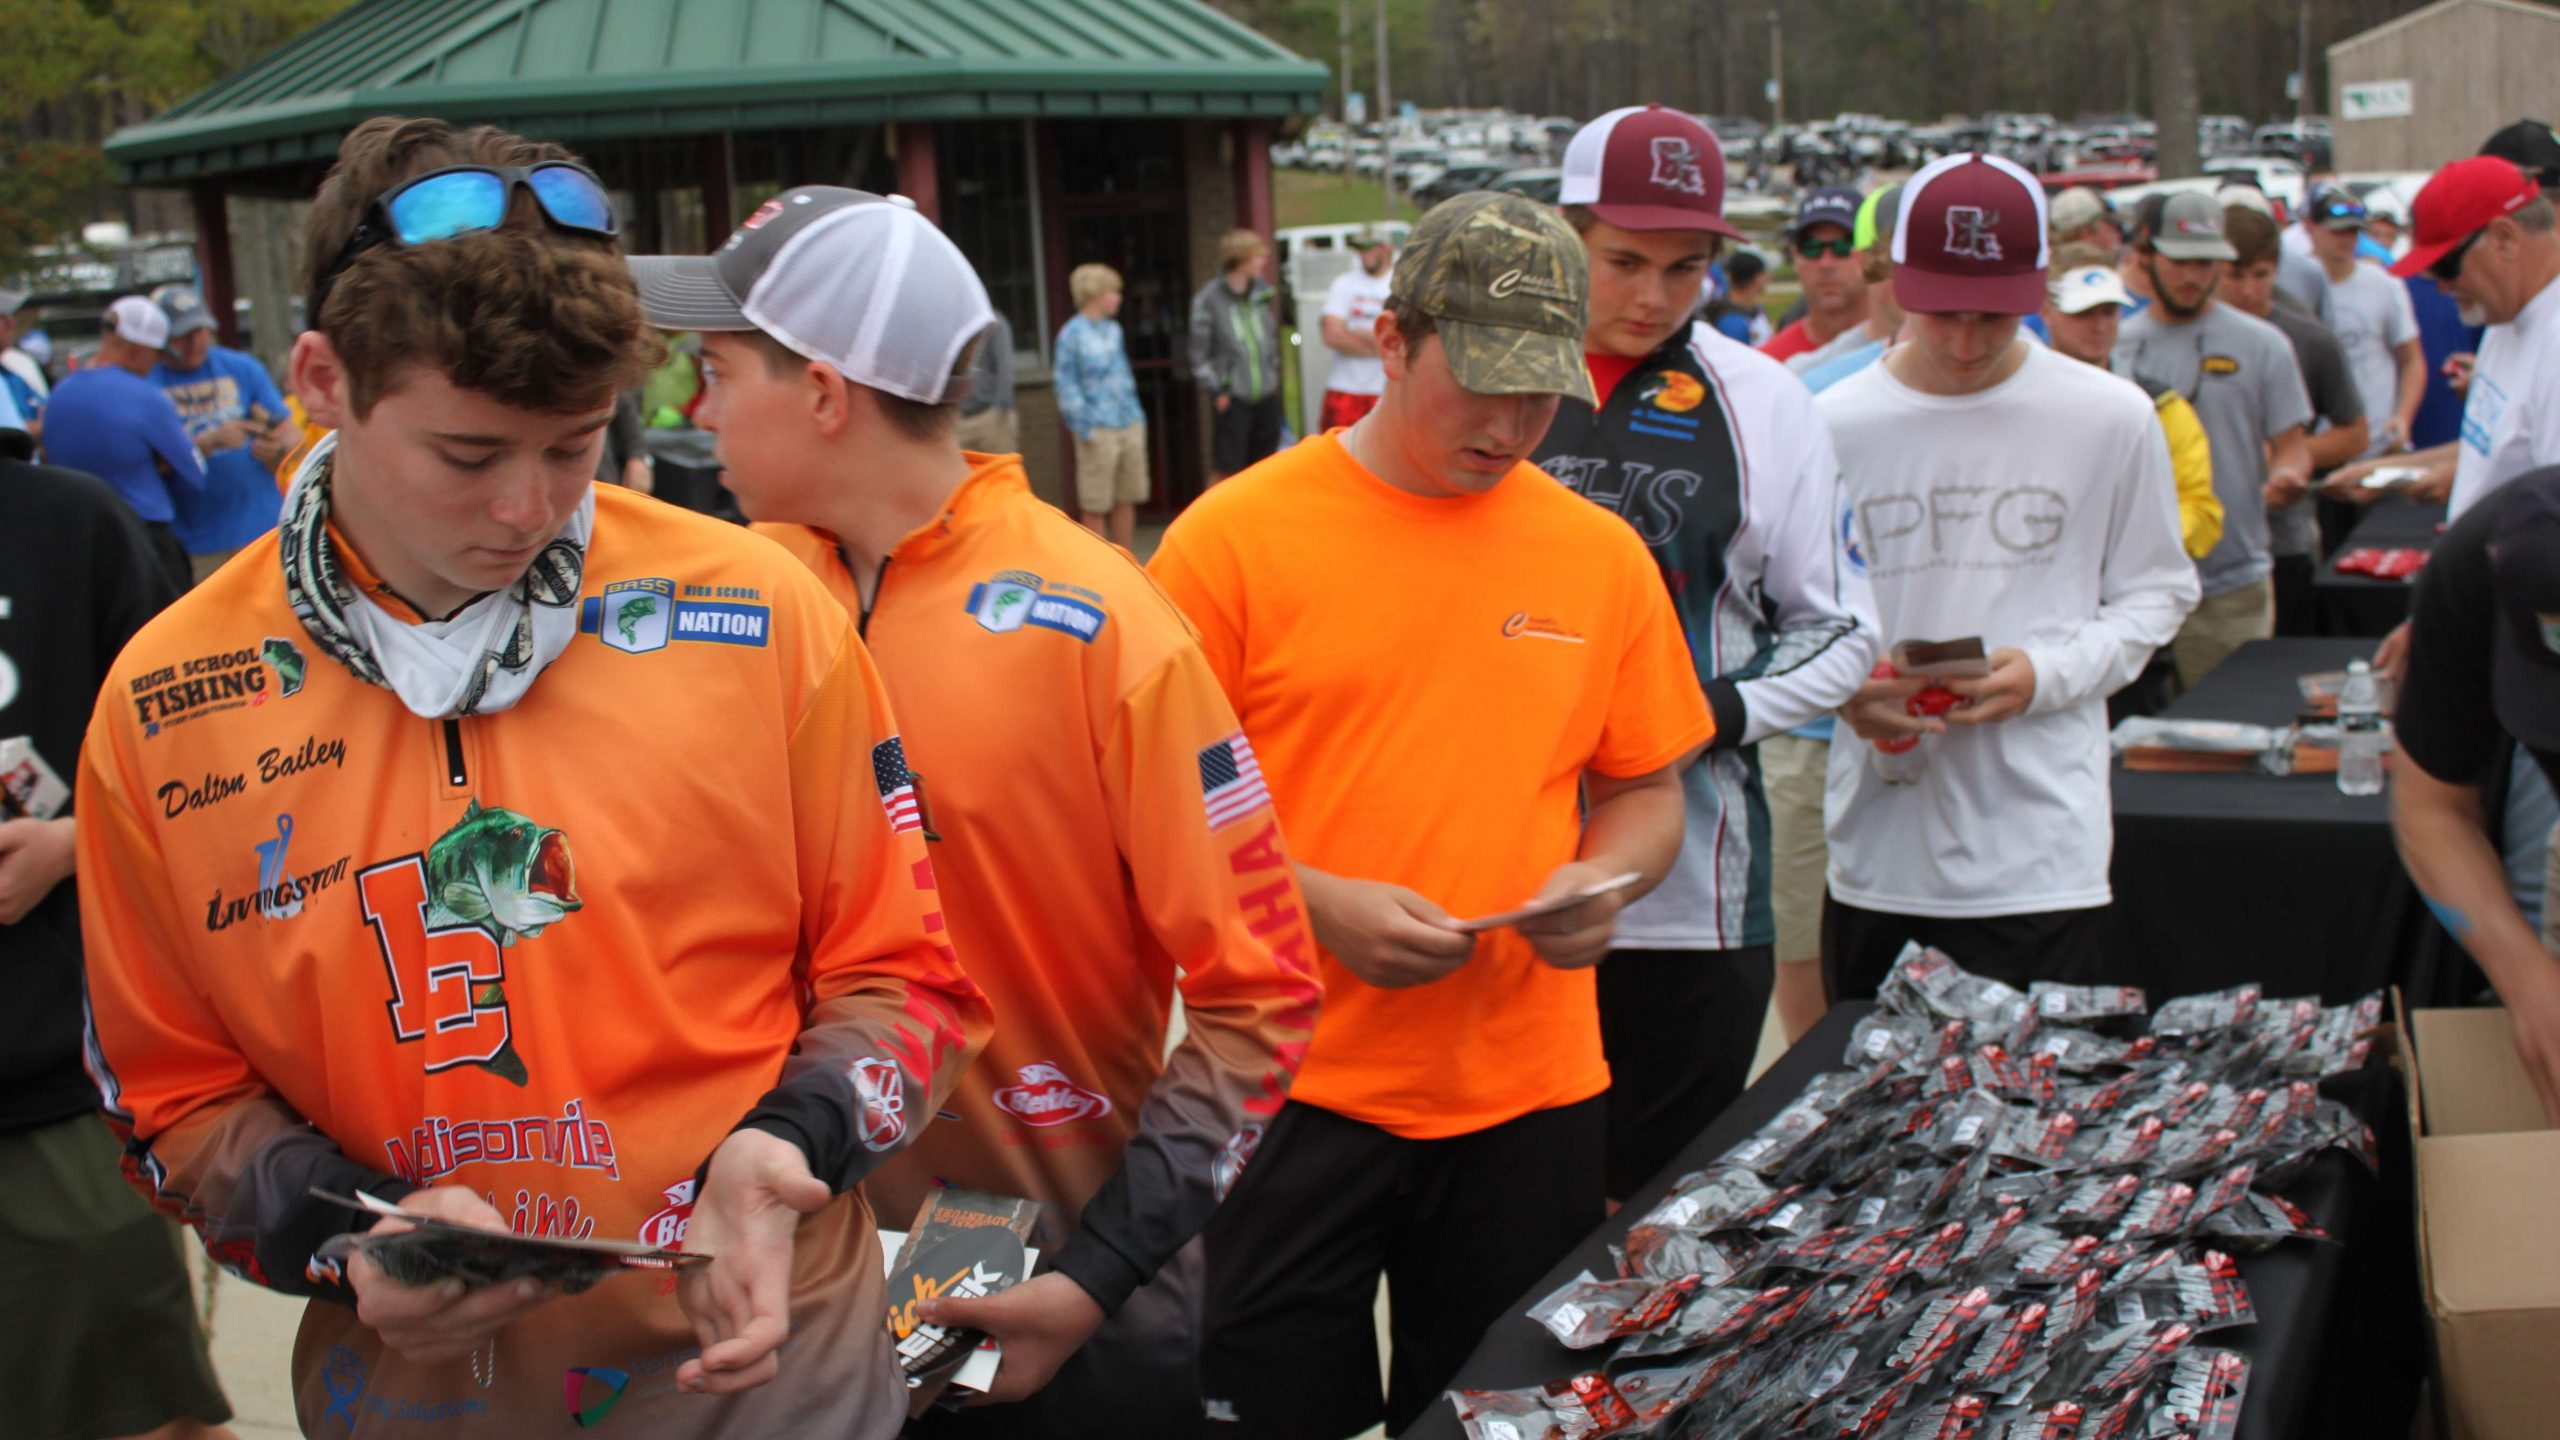 Anglers pick up some Berkley Havoc lures in the foreground.
Check out the mob of cars and boats in the parking lot in the
background. With 180 teams competing in this tournament, Cypress Bend
Marina is sure to be busy when the anglers launch Saturday morning at 6:15 a.m.